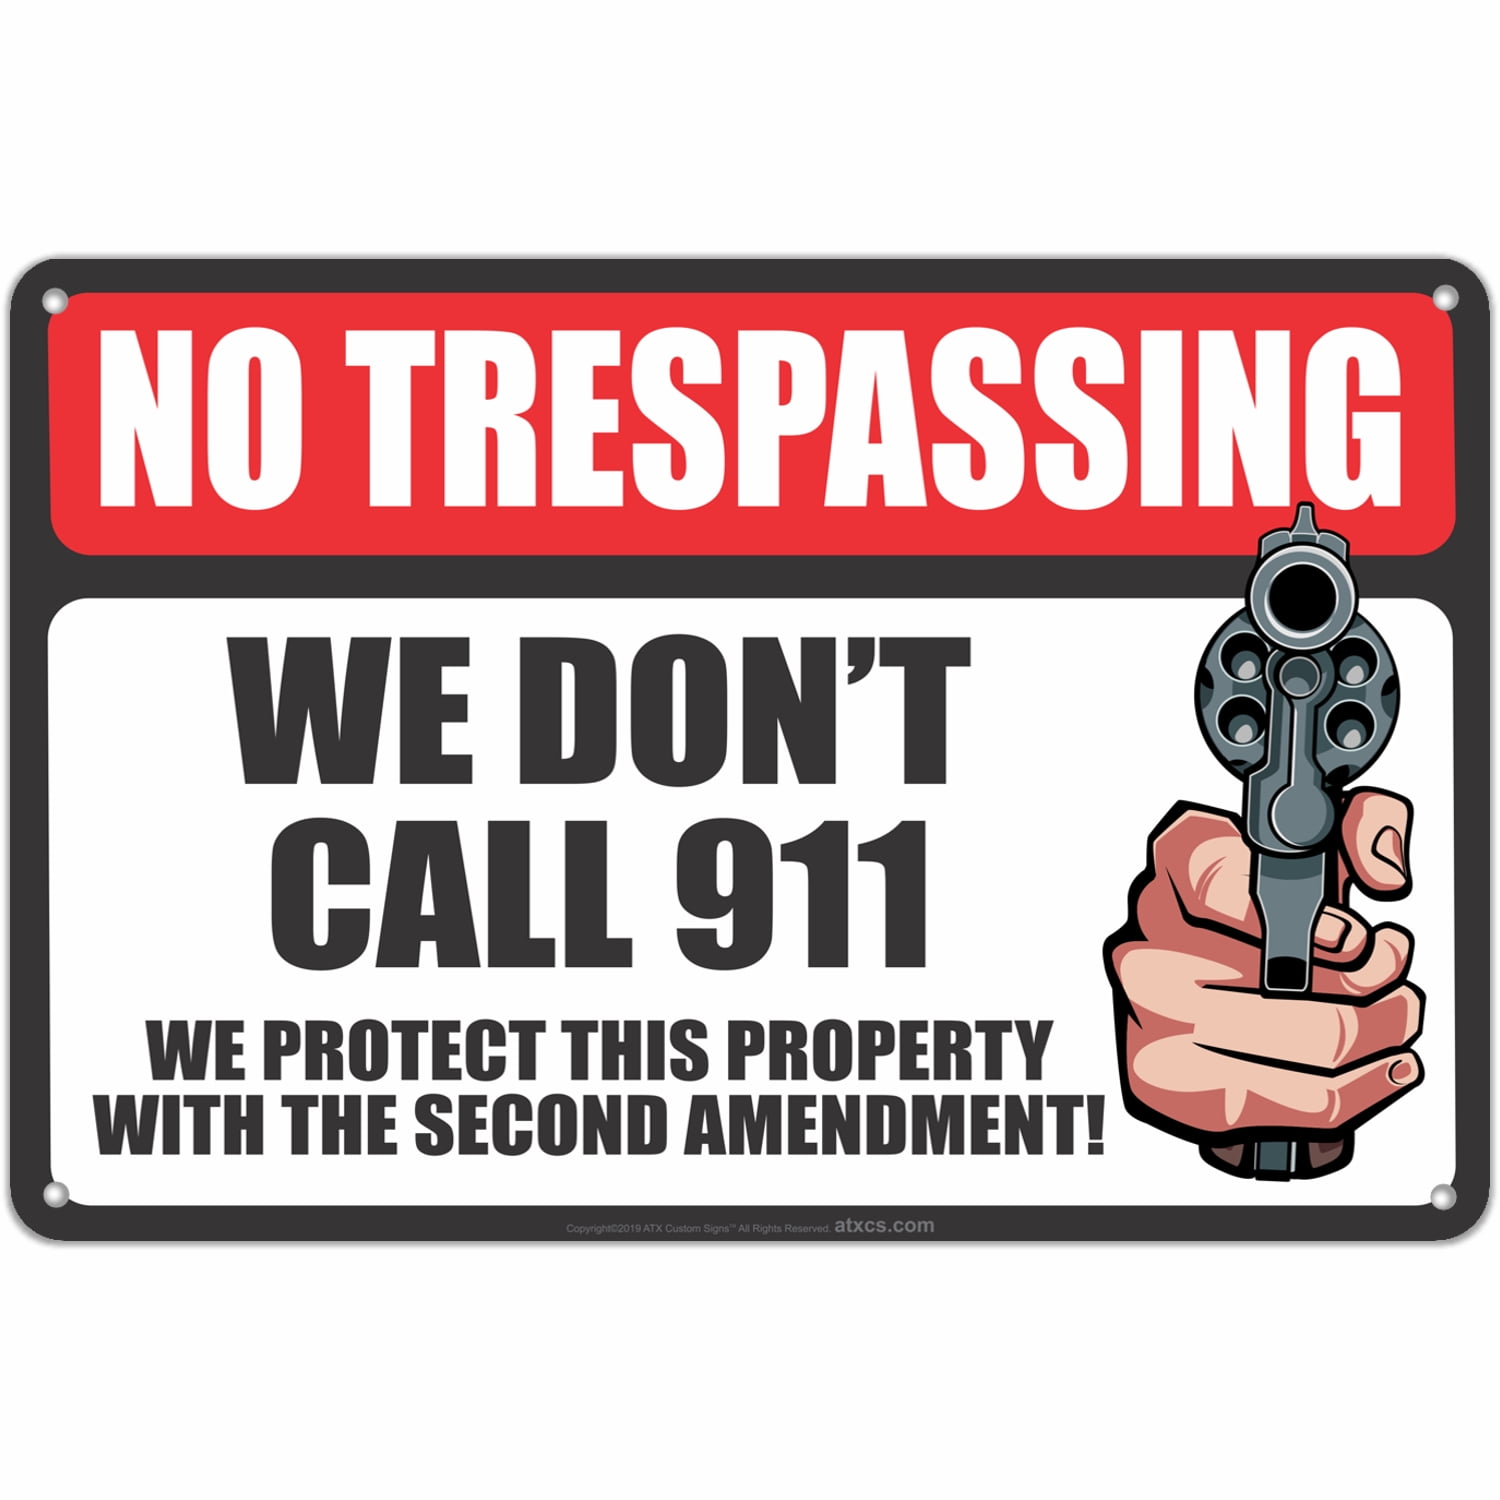 3 Legal Notice No Trespassing Signs Plastic Outdoor 8" x 11" wholesale lot USA 